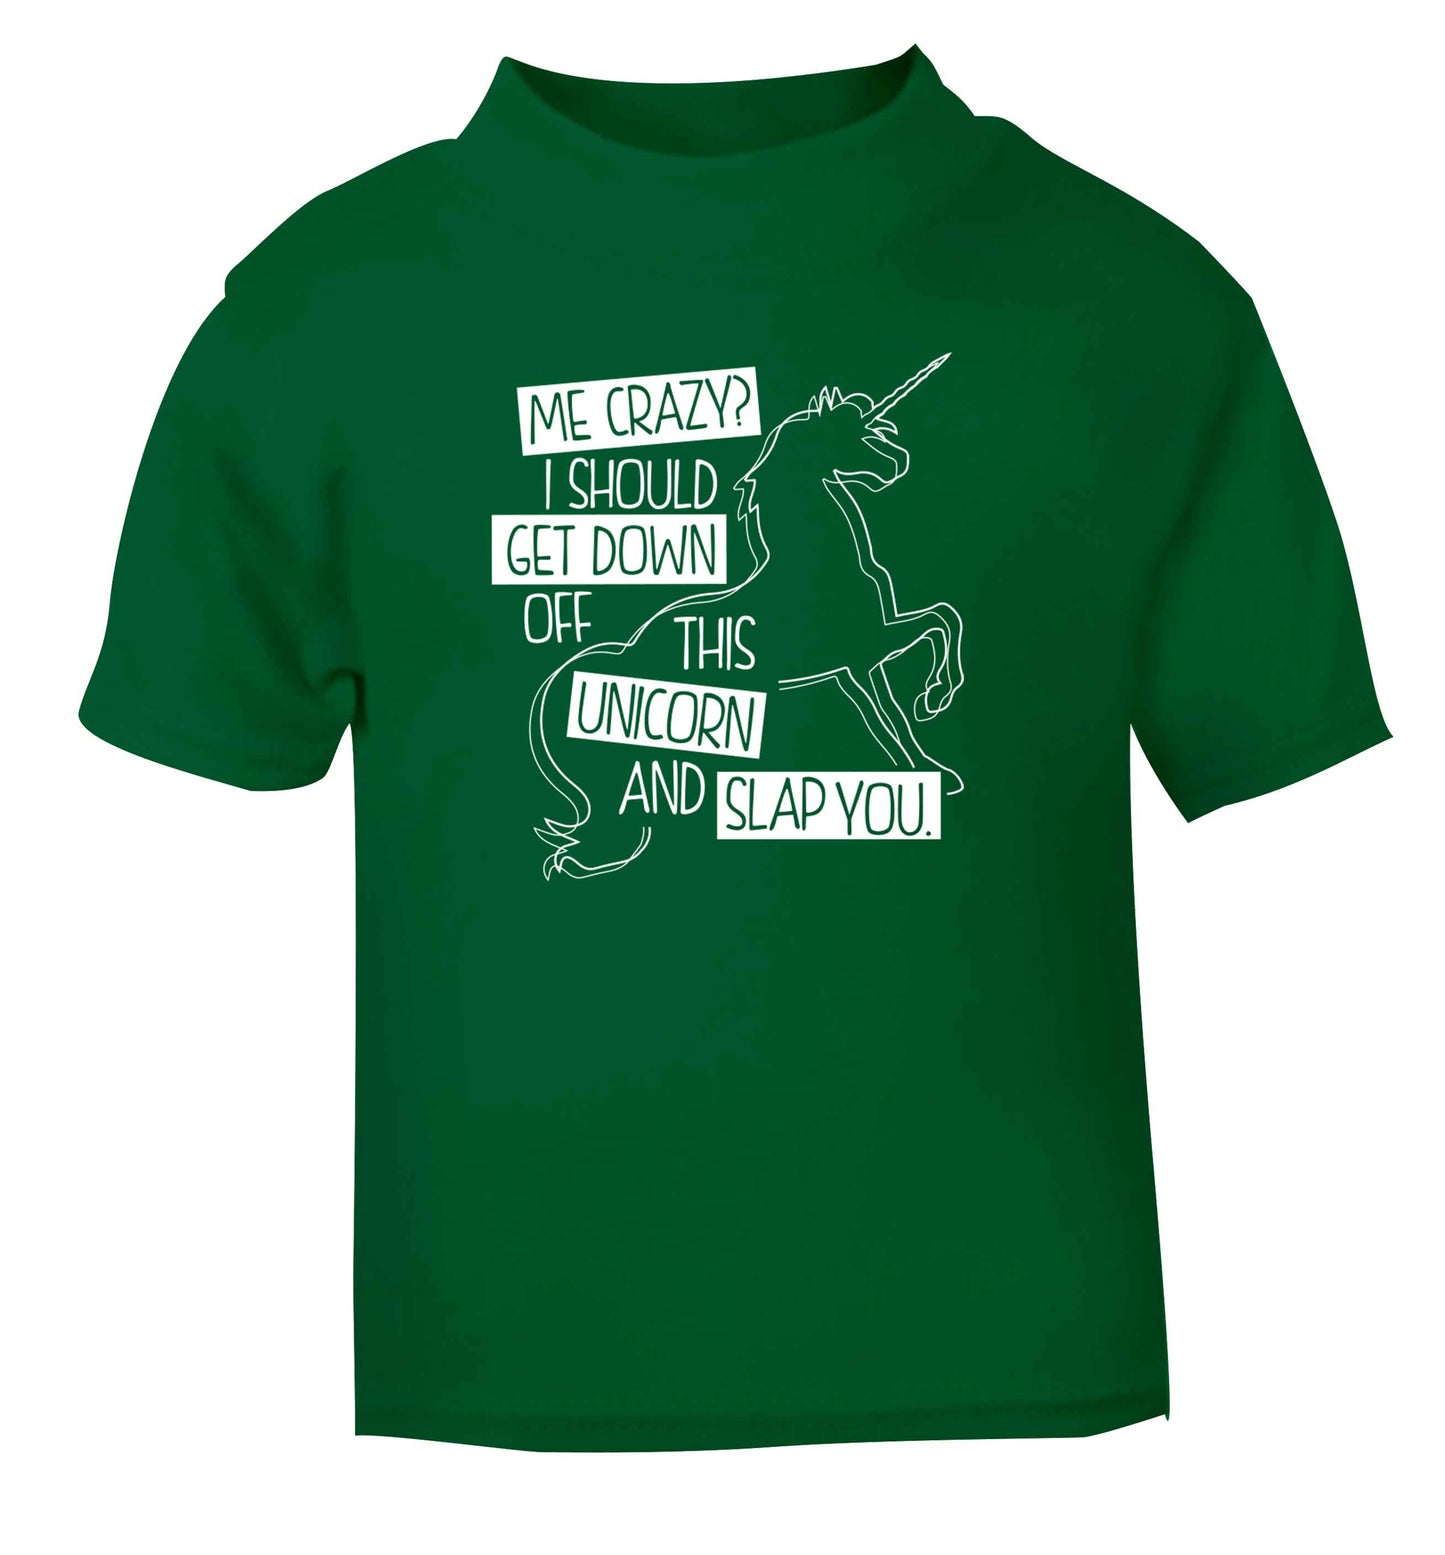 Me crazy? I should get down off this unicorn and slap you green Baby Toddler Tshirt 2 Years